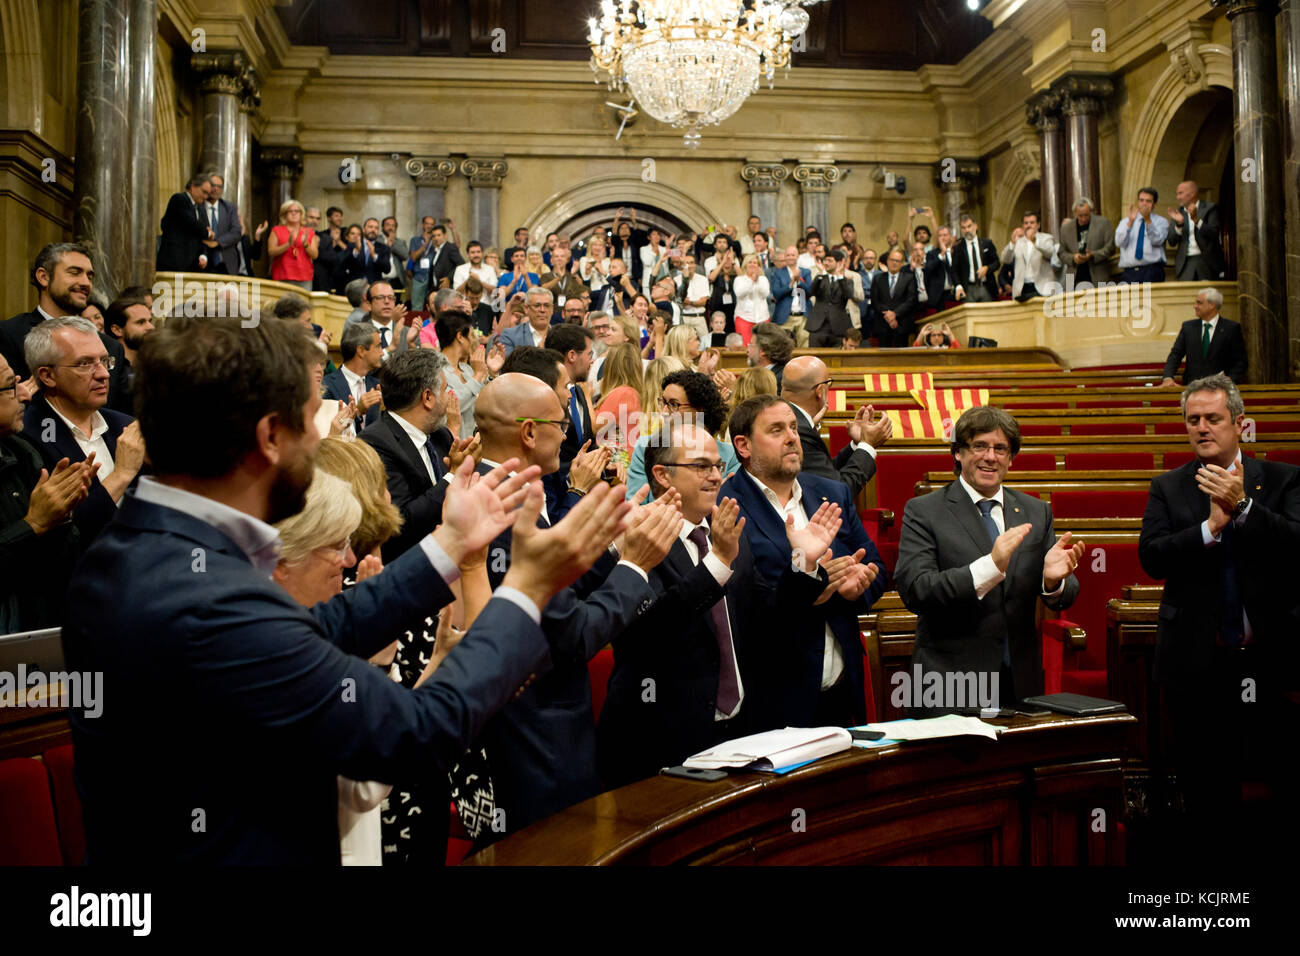 Barcelona, Catalonia, Spain. 6th Sep, 2017. Catalan president Carles Puigdemont (second right) and pro-indpendence parliamentarians at Catalonia's Parliament celebrate the law to call a referendum on independence. On the 6th of September 2017 Catalan Parliament passed the Law on the Referendum on Self-determination of Catalonia. The Unionist Forces of Catalonia and the Spanish government were frontally opposed to the referendum and considered it illegal. Whilst the Catalan government was launching preparations, the Spanish Kingdom began a campaign based on judicial decisions that led to Stock Photo